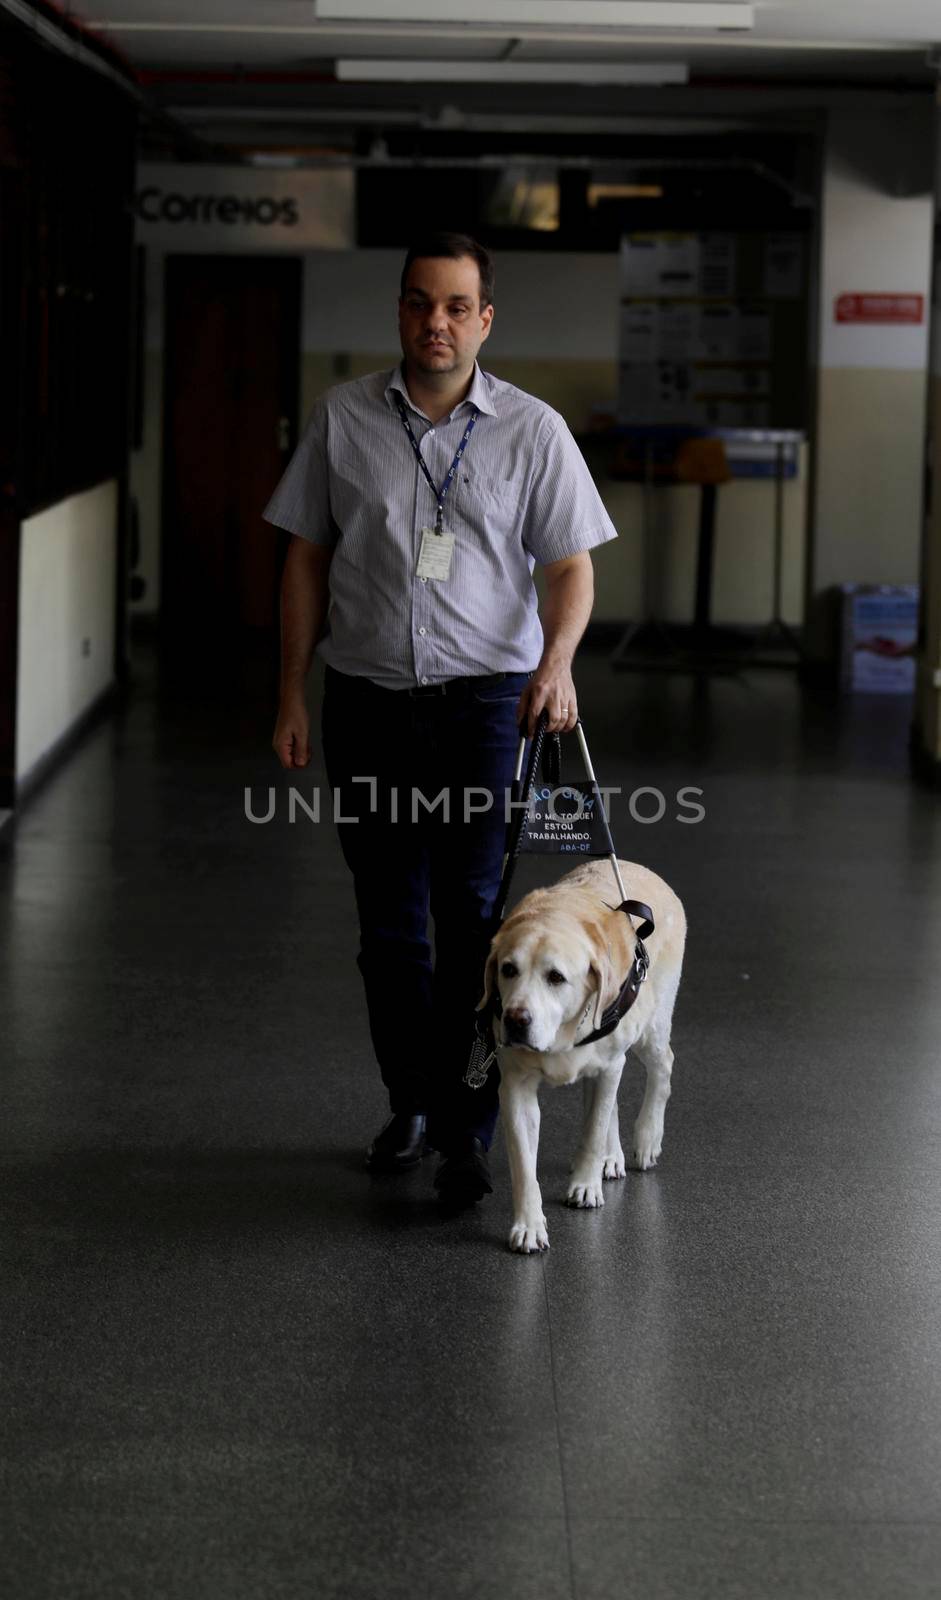 blind man uses guide dog for locomotion in salvador by joasouza